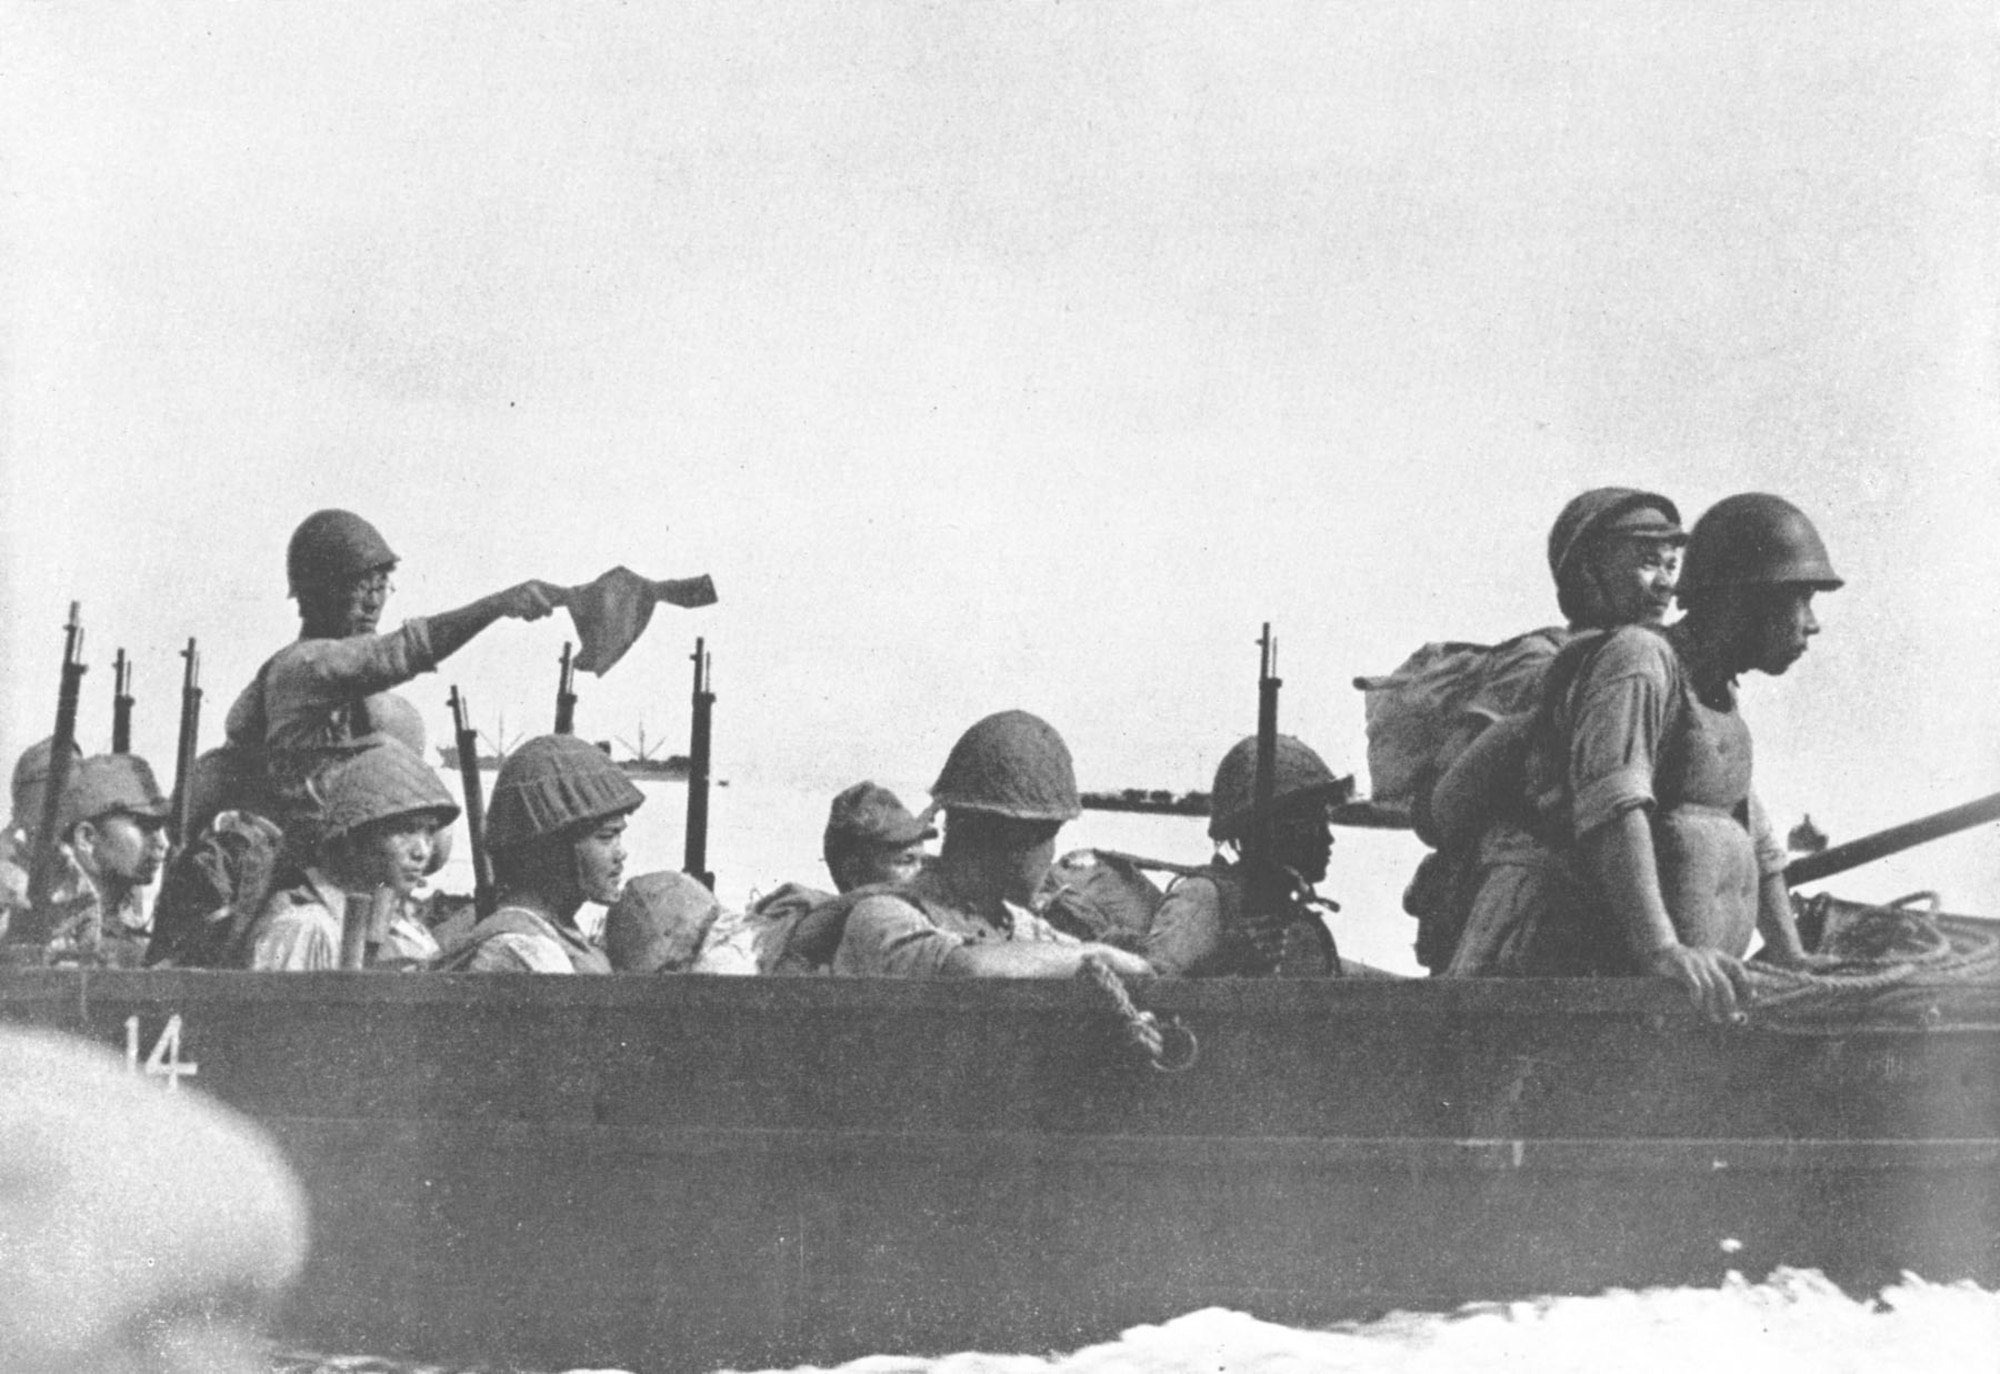 Japanese troops coming ashore in the main landing at Lingayen Gulf, Luzon, on Dec. 22, 1941. (U.S. Air Force photo)